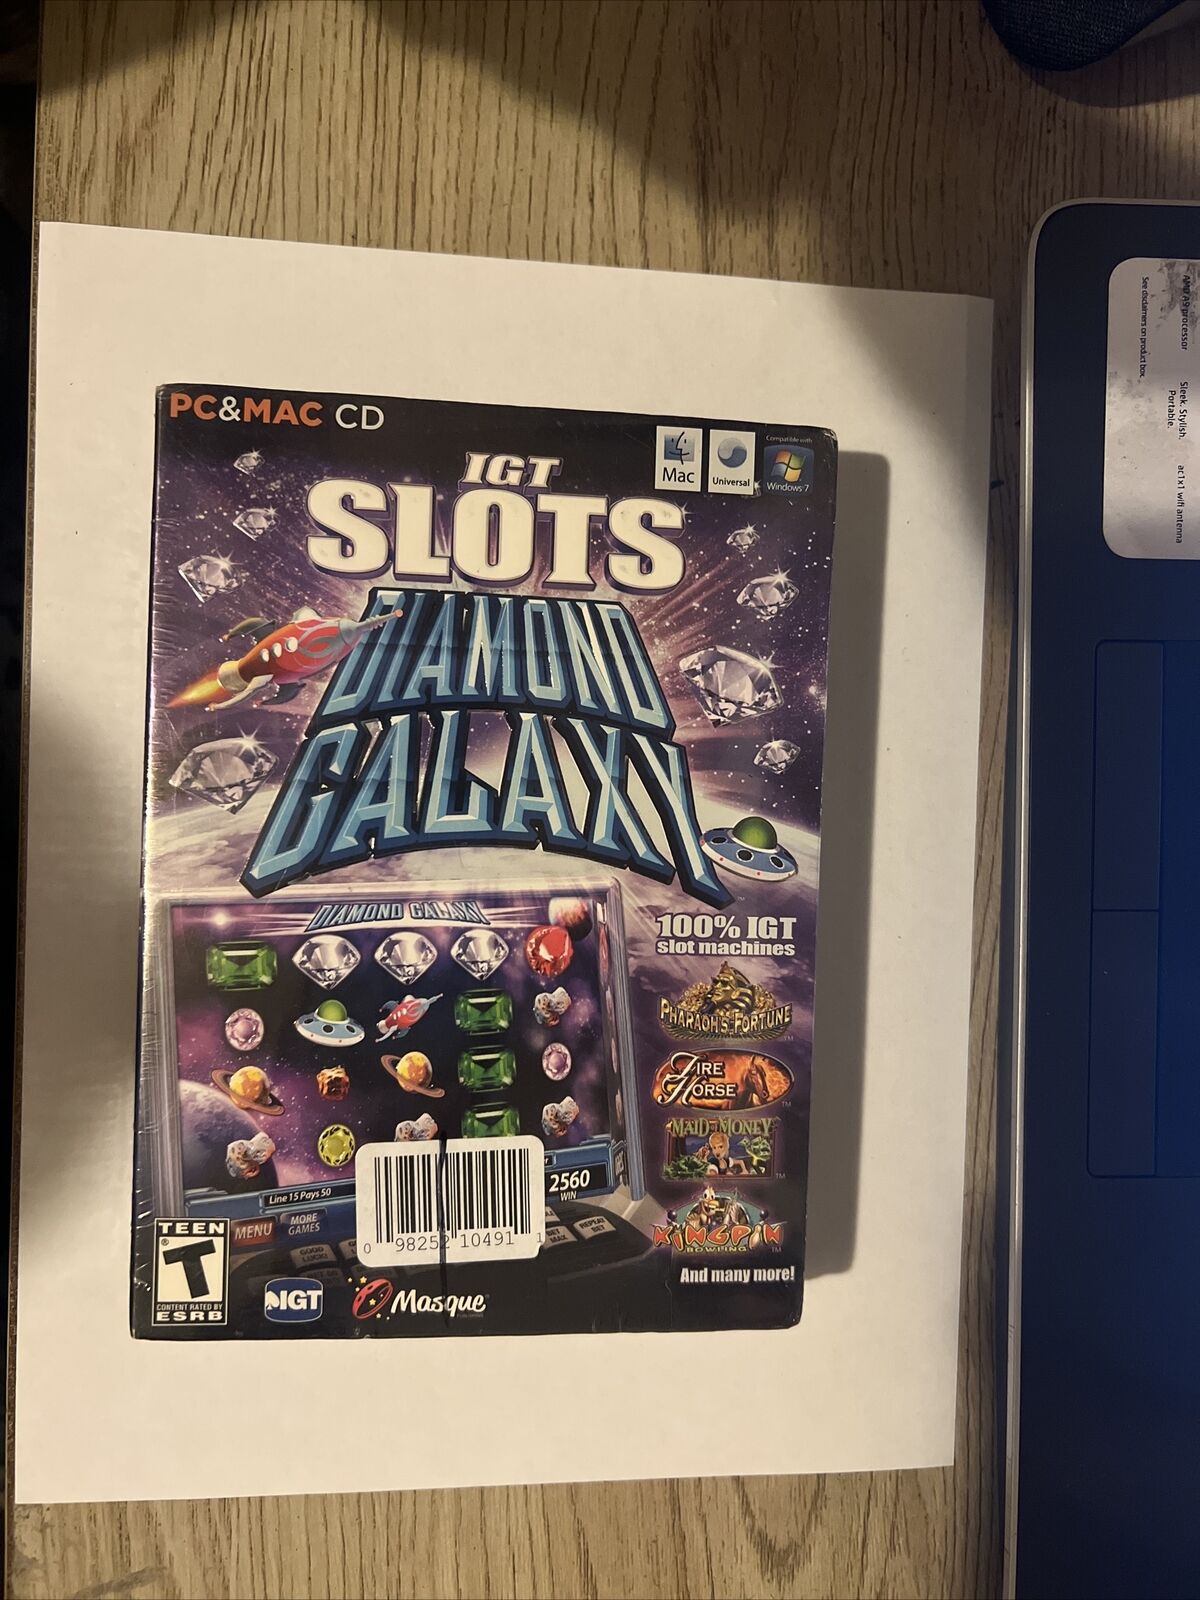 IGT Slots Diamond Galaxy PC/Mac 2012 Authentic Slots And Little Green Man 2 Game